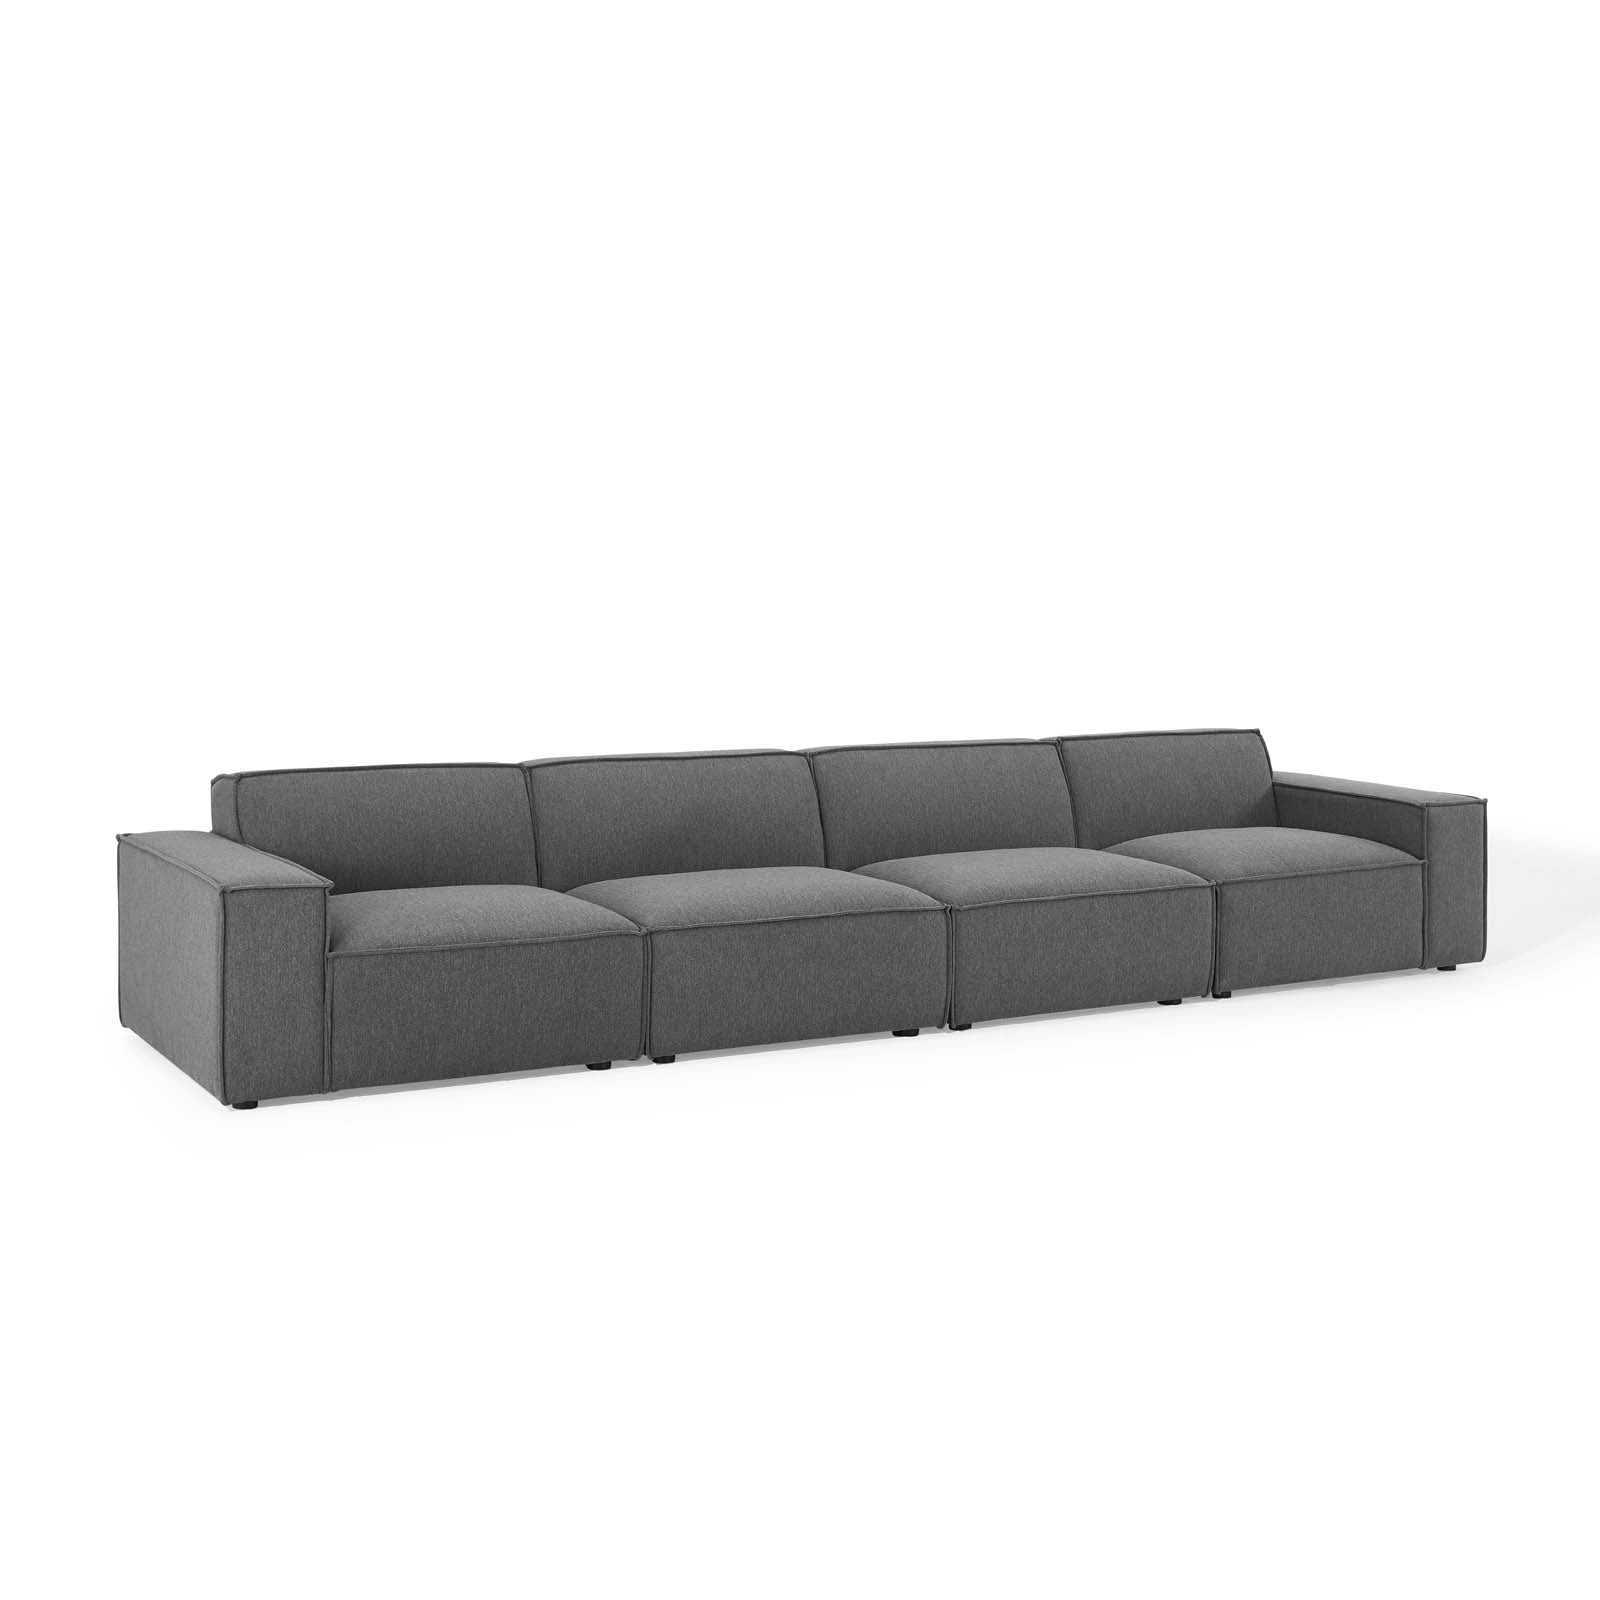 Modway Sofas & Couches - Restore 4-Piece Sofa Charcoal